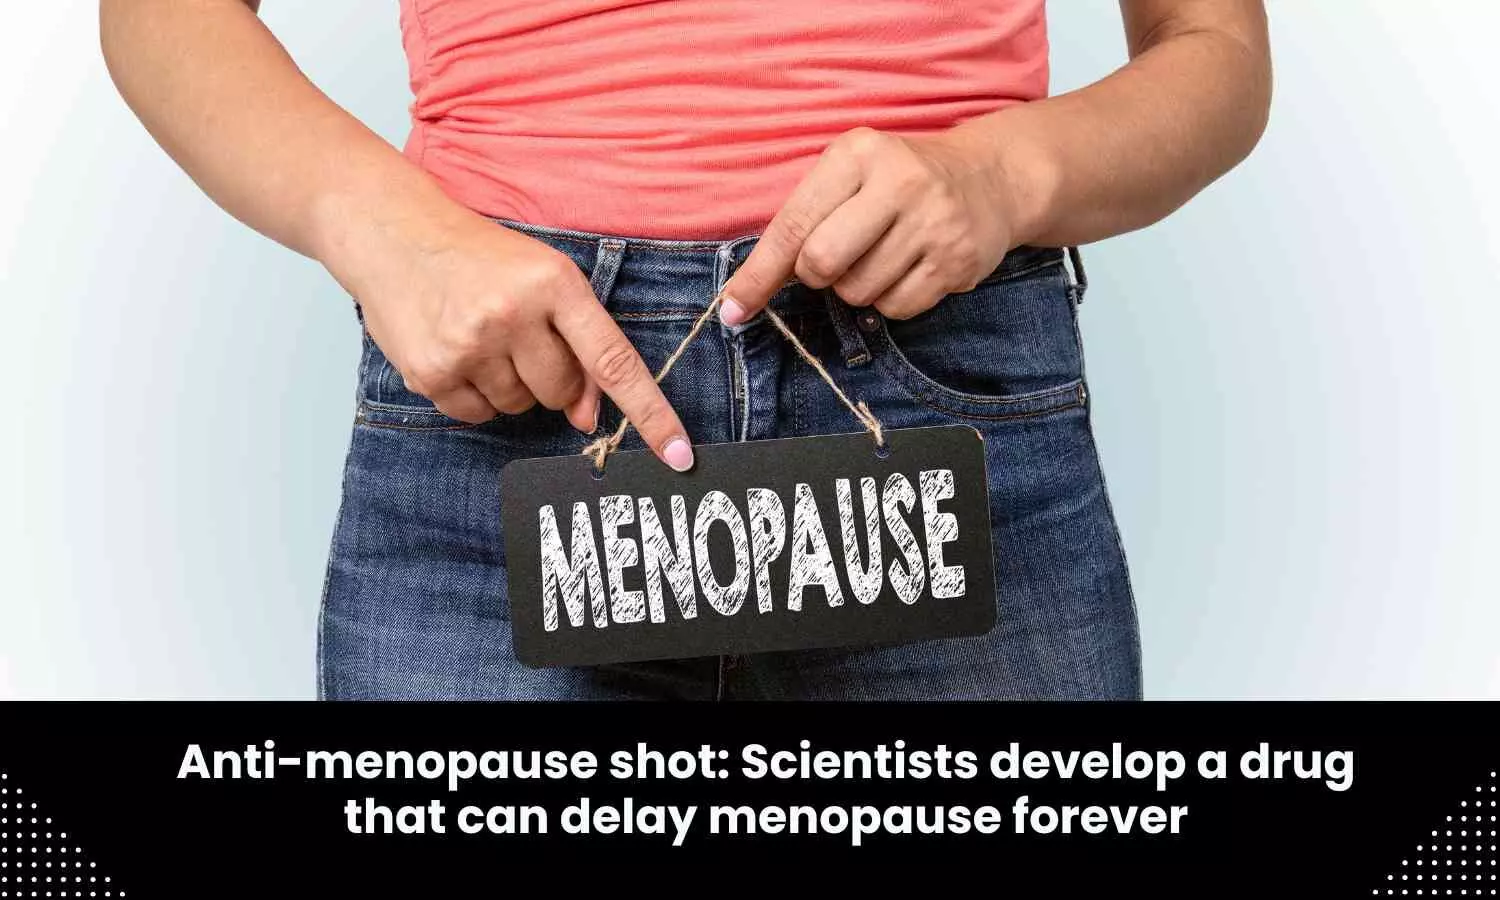 A drug developed by scientists that can delay menopause forever?